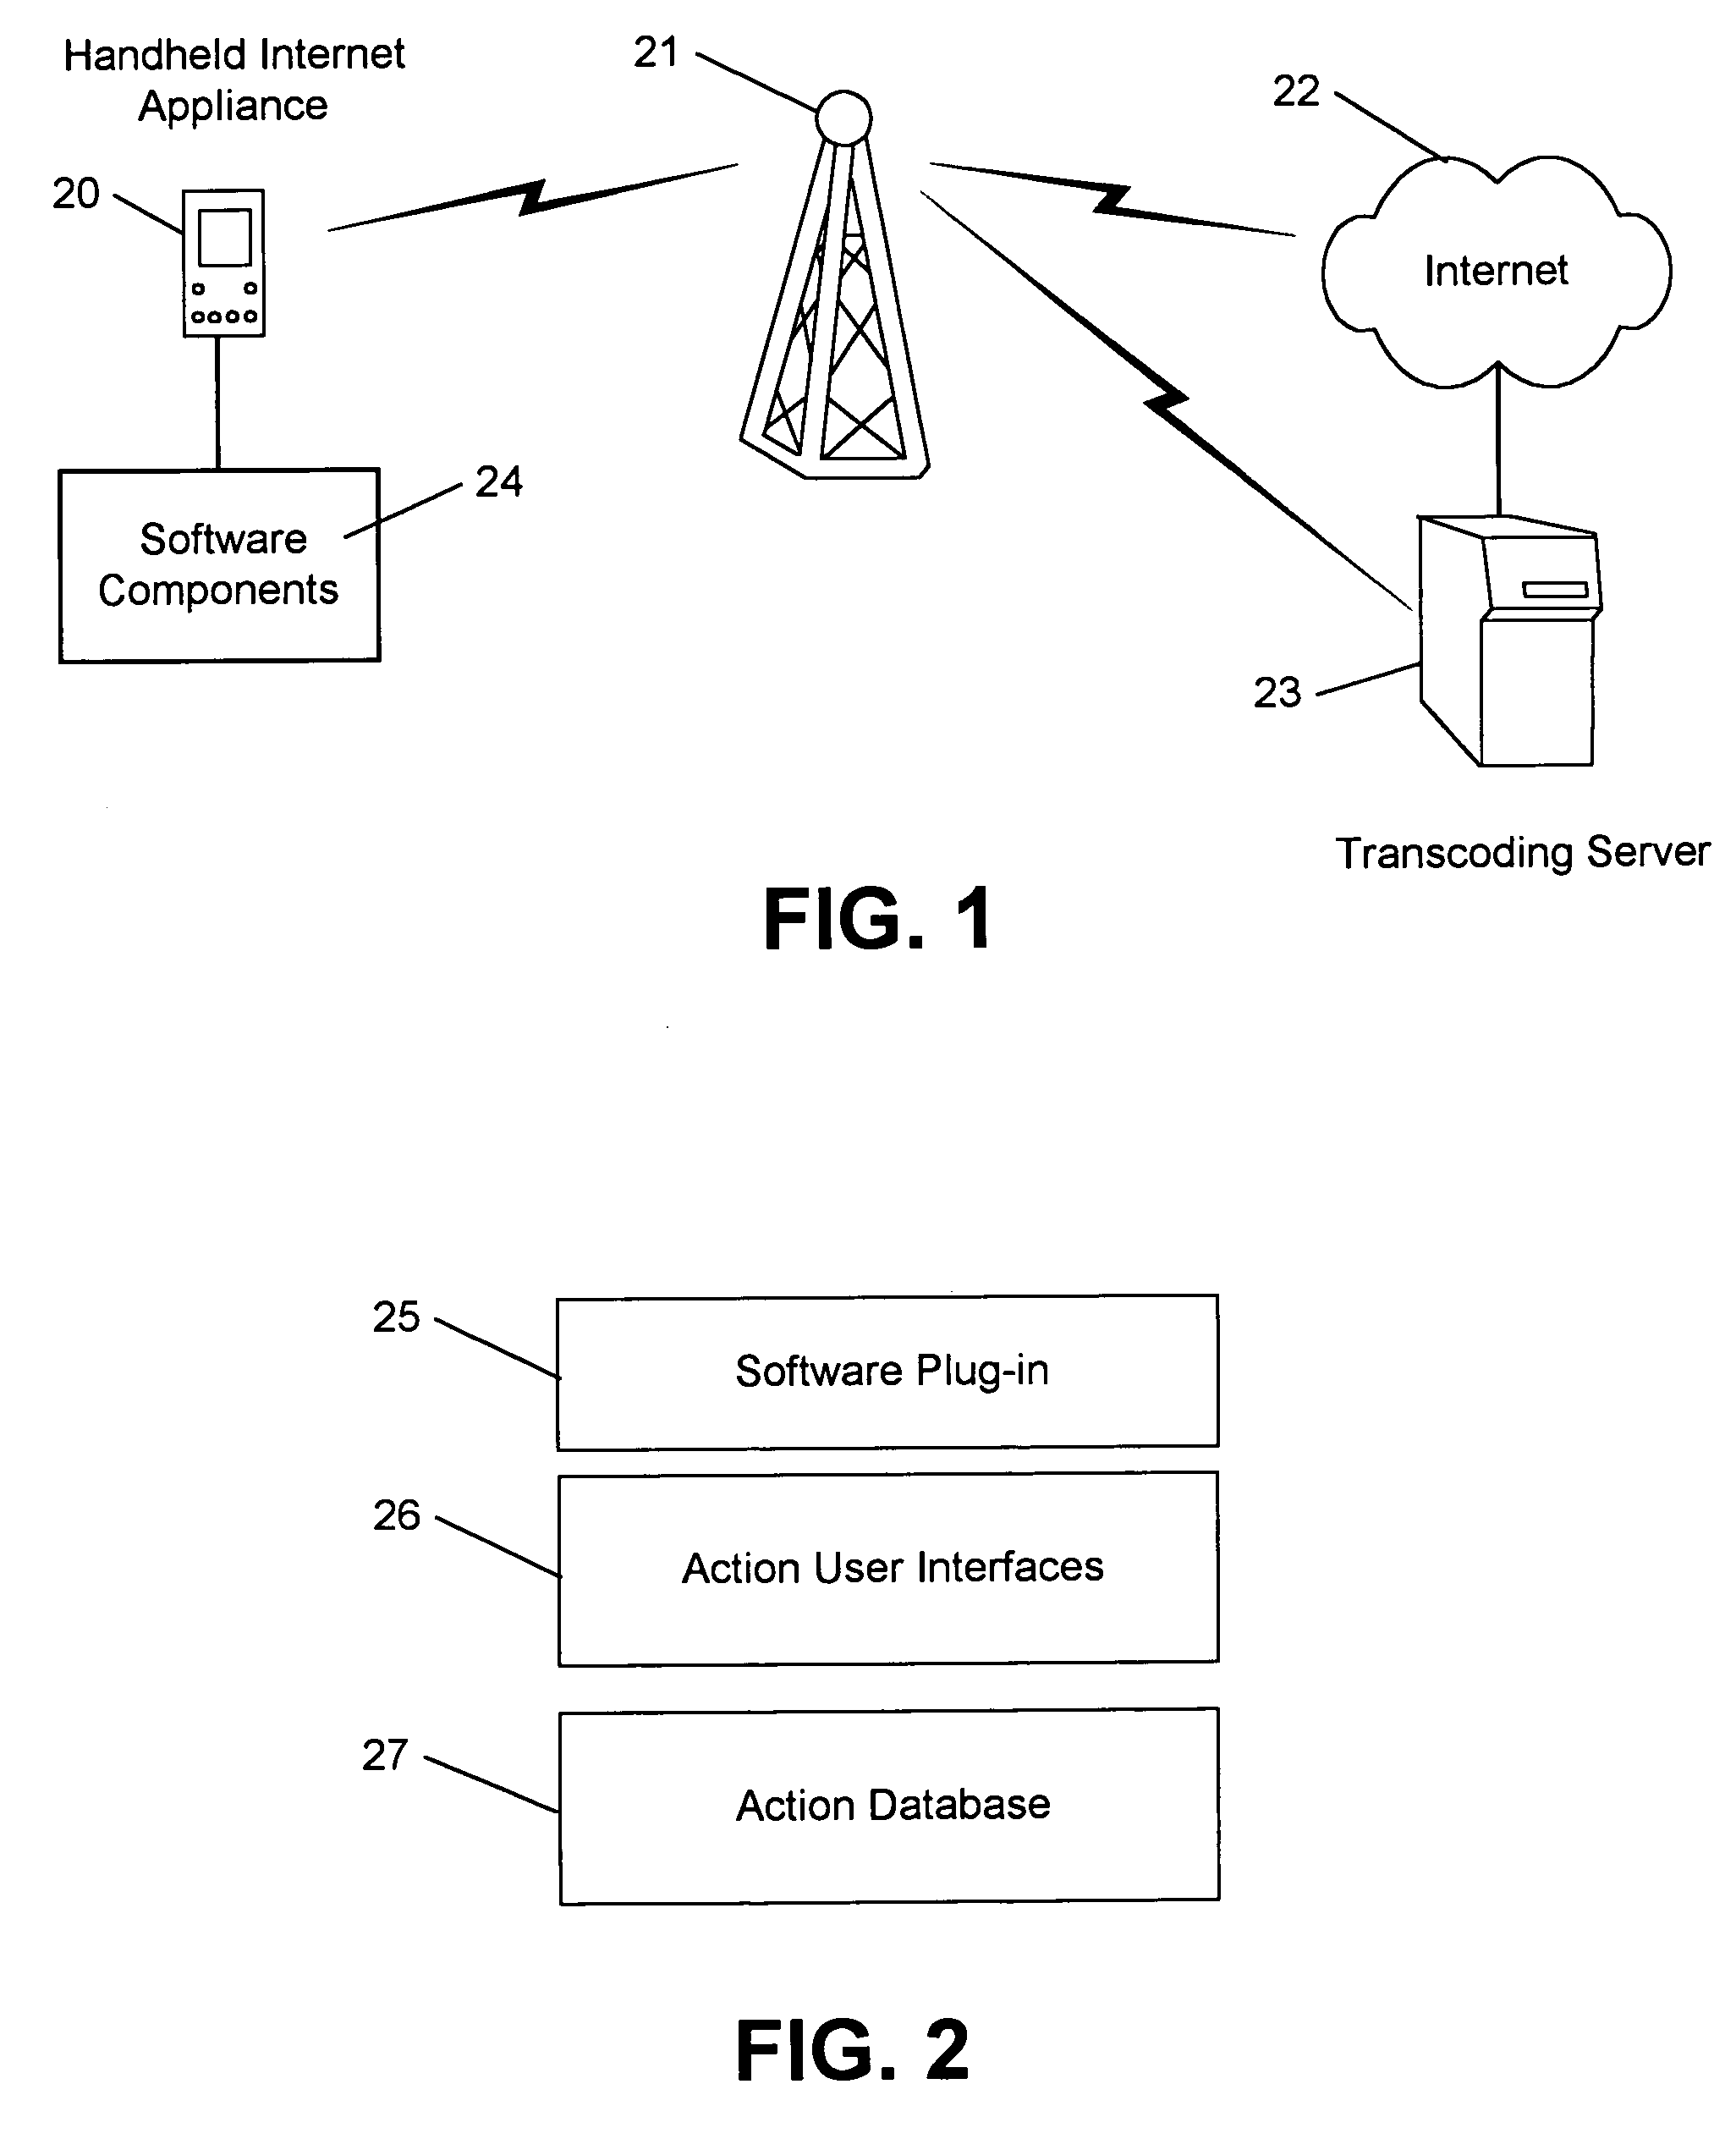 Systems and methods for automatically accessing internet information from a local application on a handheld internet appliance